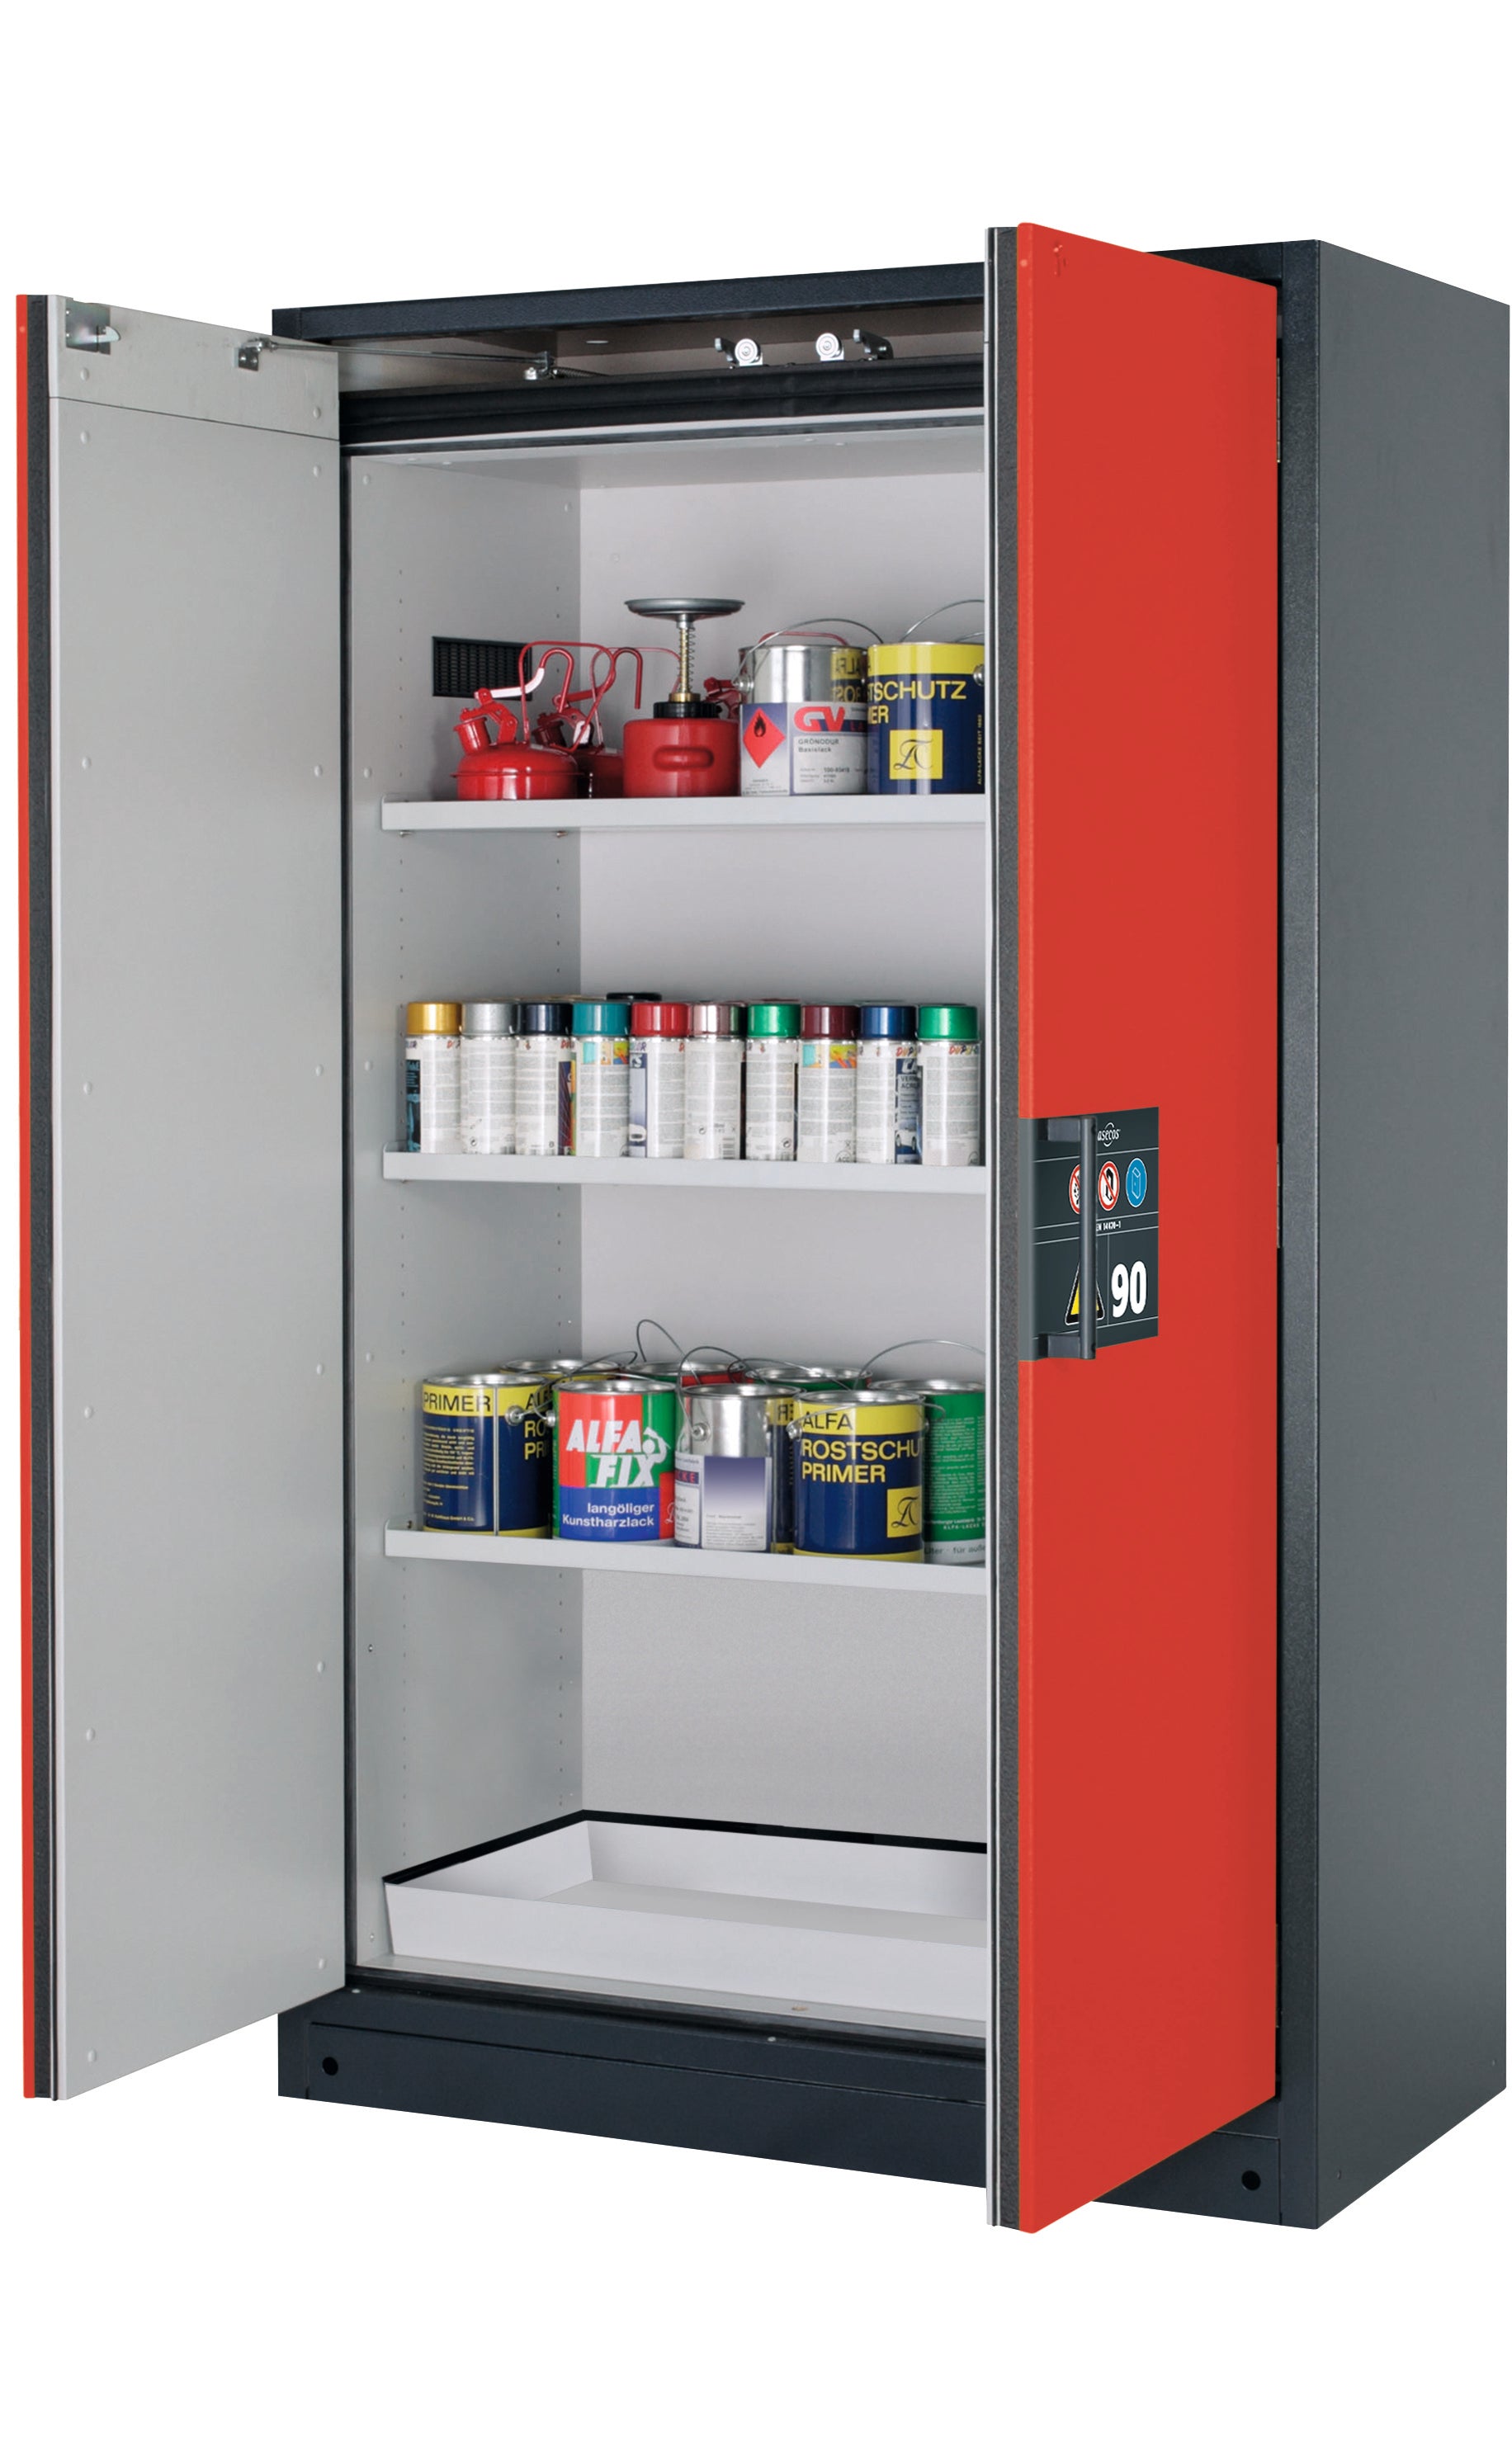 Type 90 safety storage cabinet Q-CLASSIC-90 model Q90.195.120 in traffic red RAL 3020 with 3x shelf standard (sheet steel),